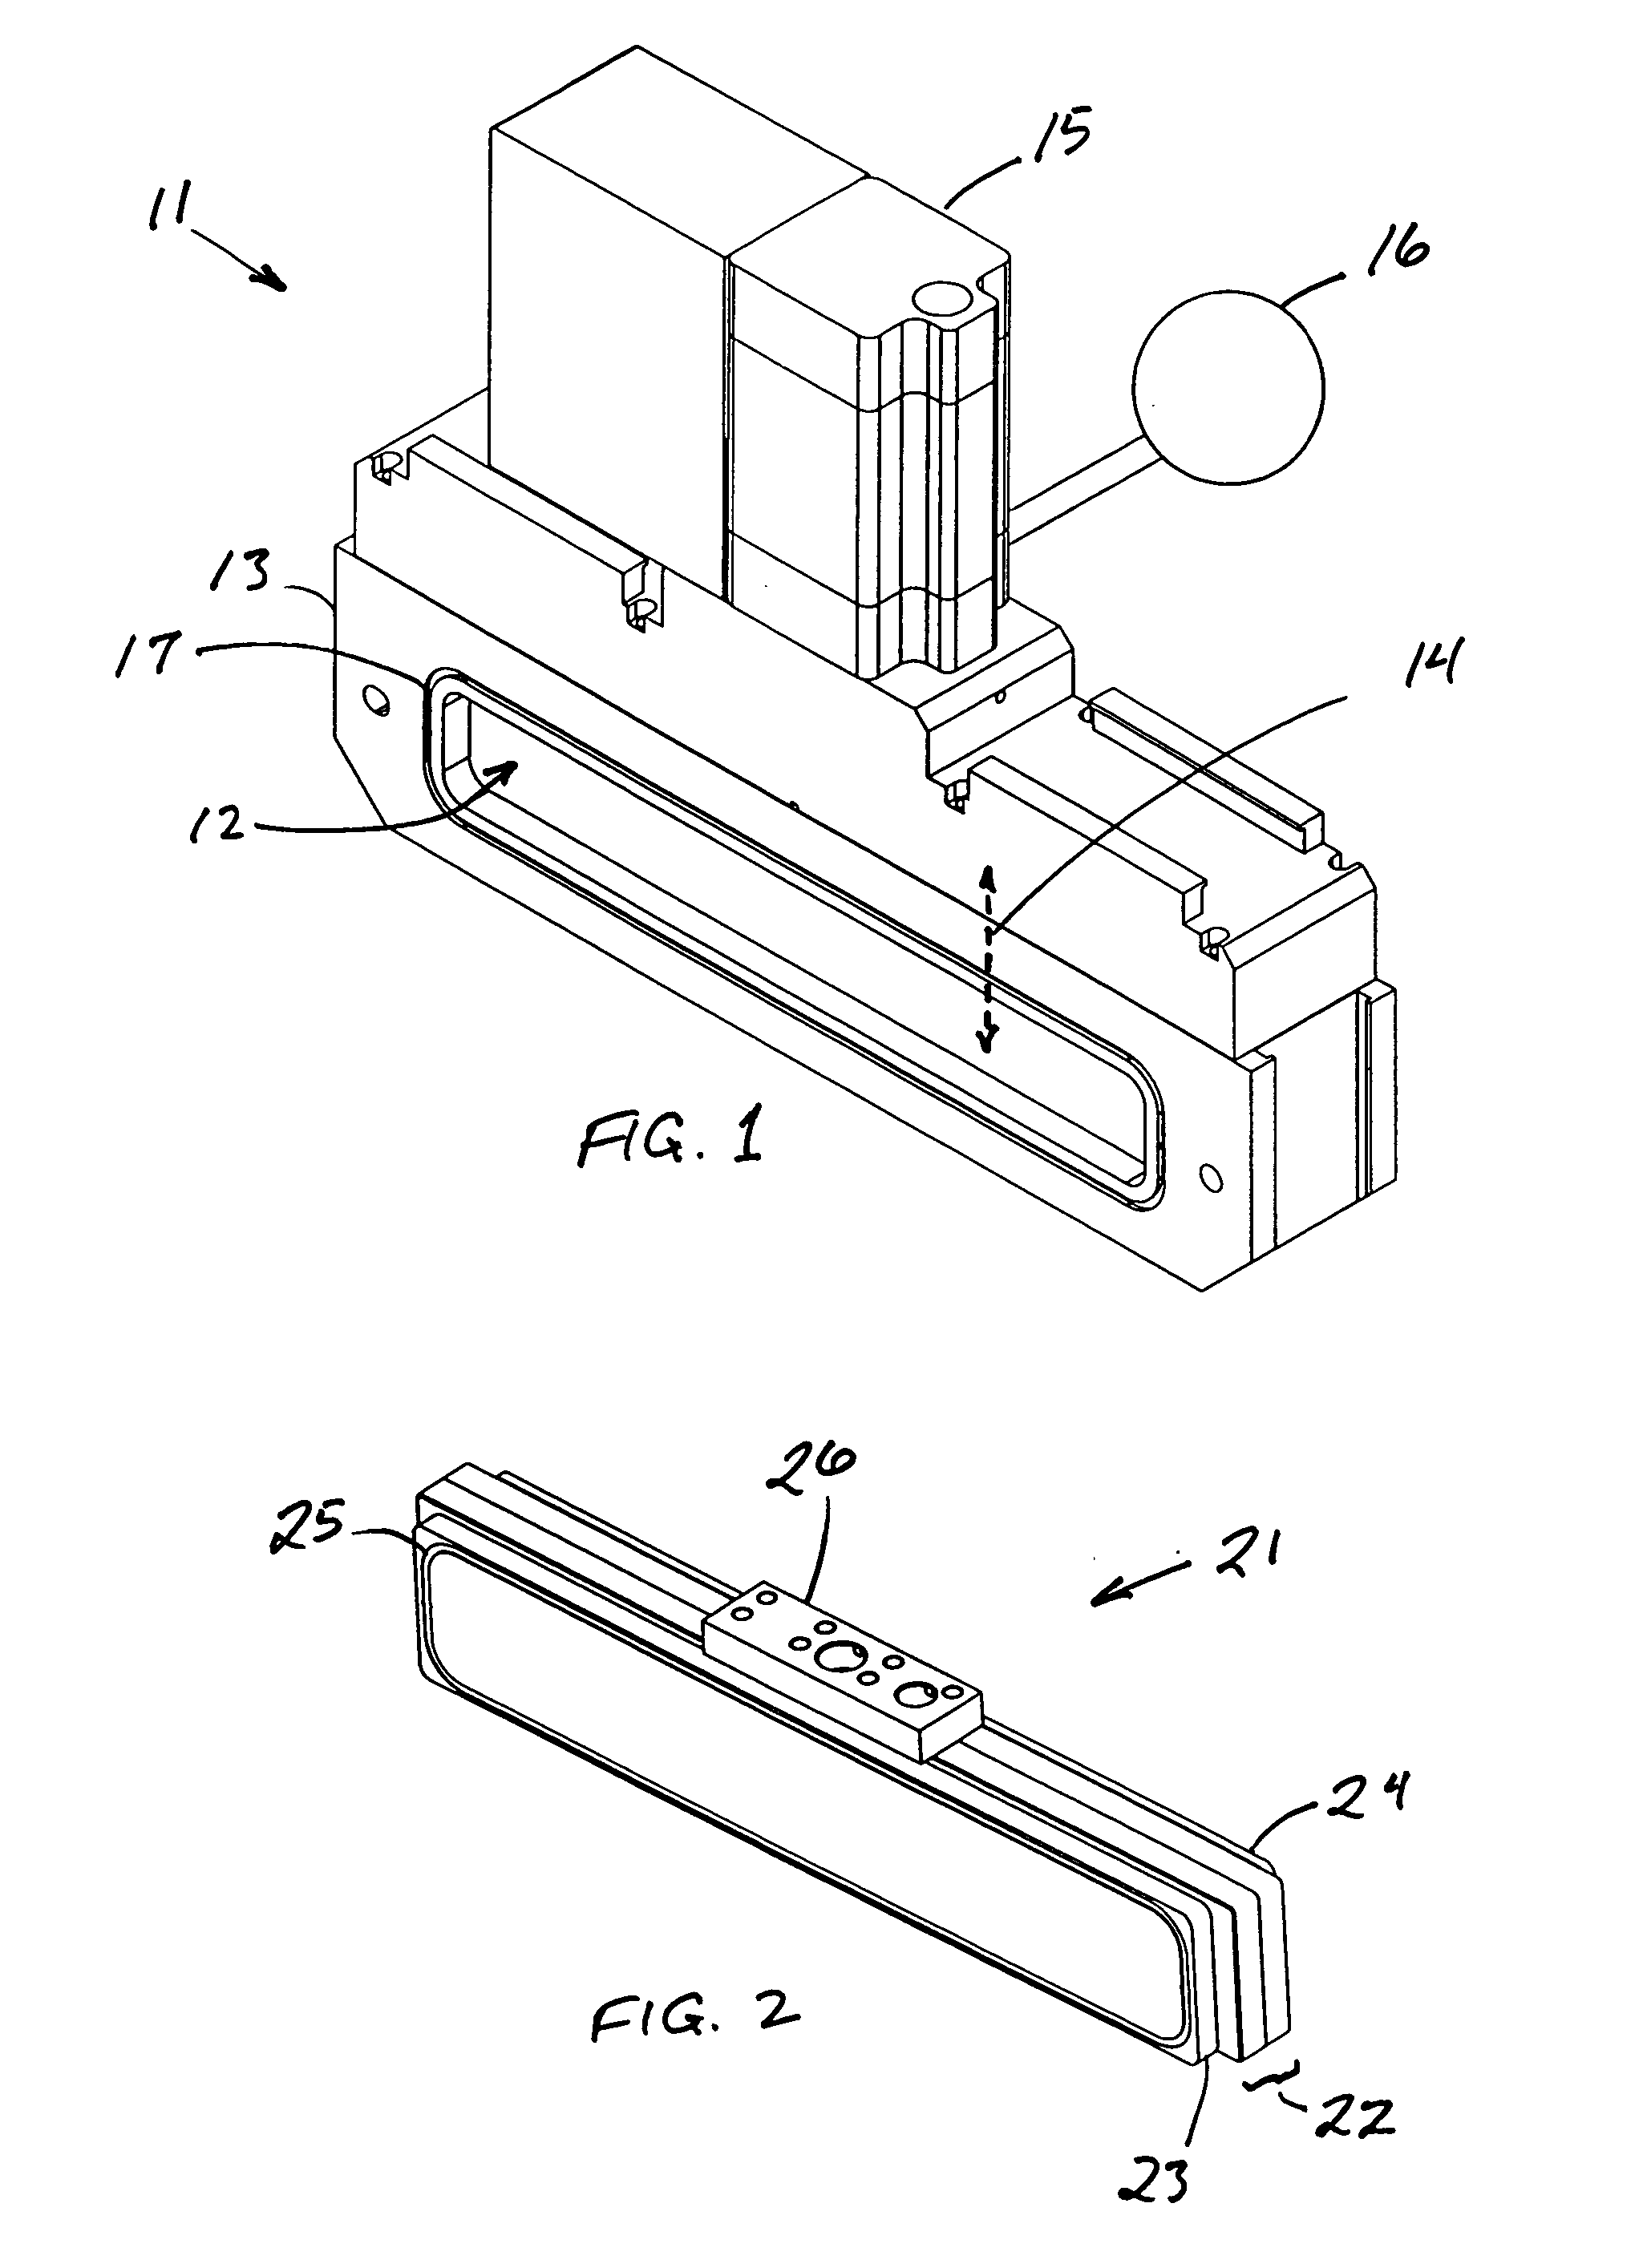 High-vacuum valve with retractable valve plate to eliminate abrasion